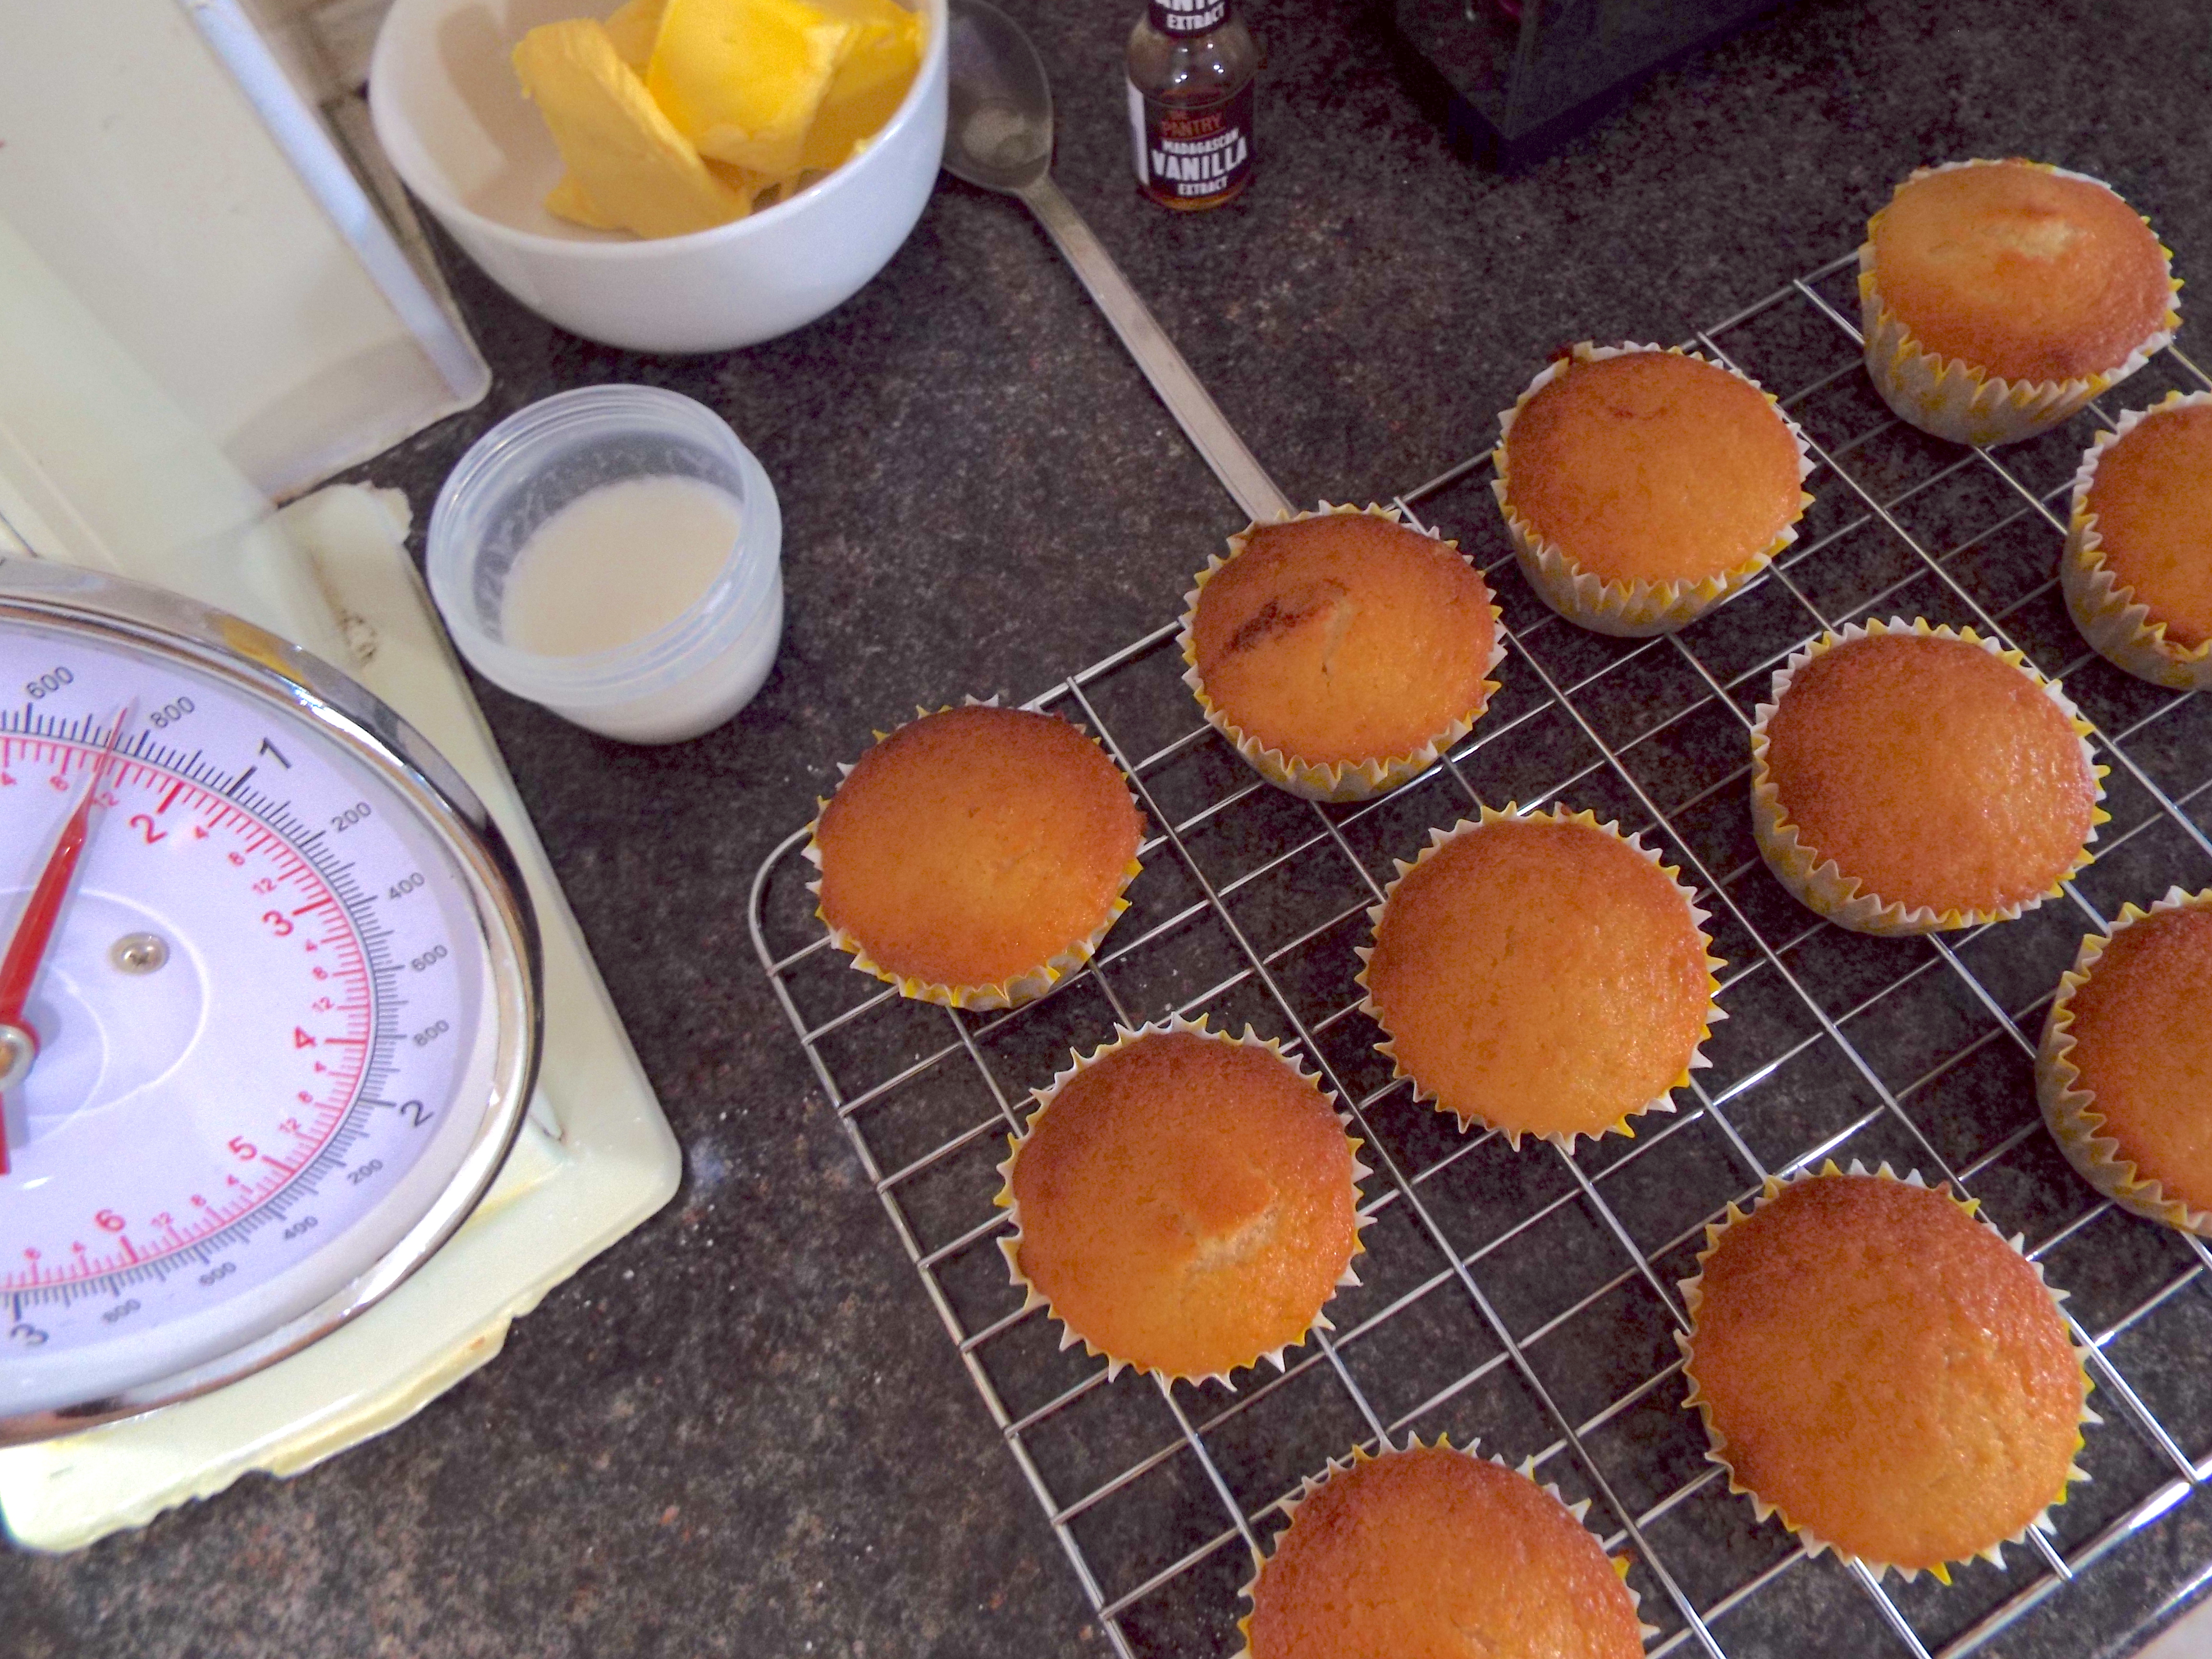 Freshly baked cupcakes on kitchen counter, beside cream old fashioned scales, butter and icing sugar.